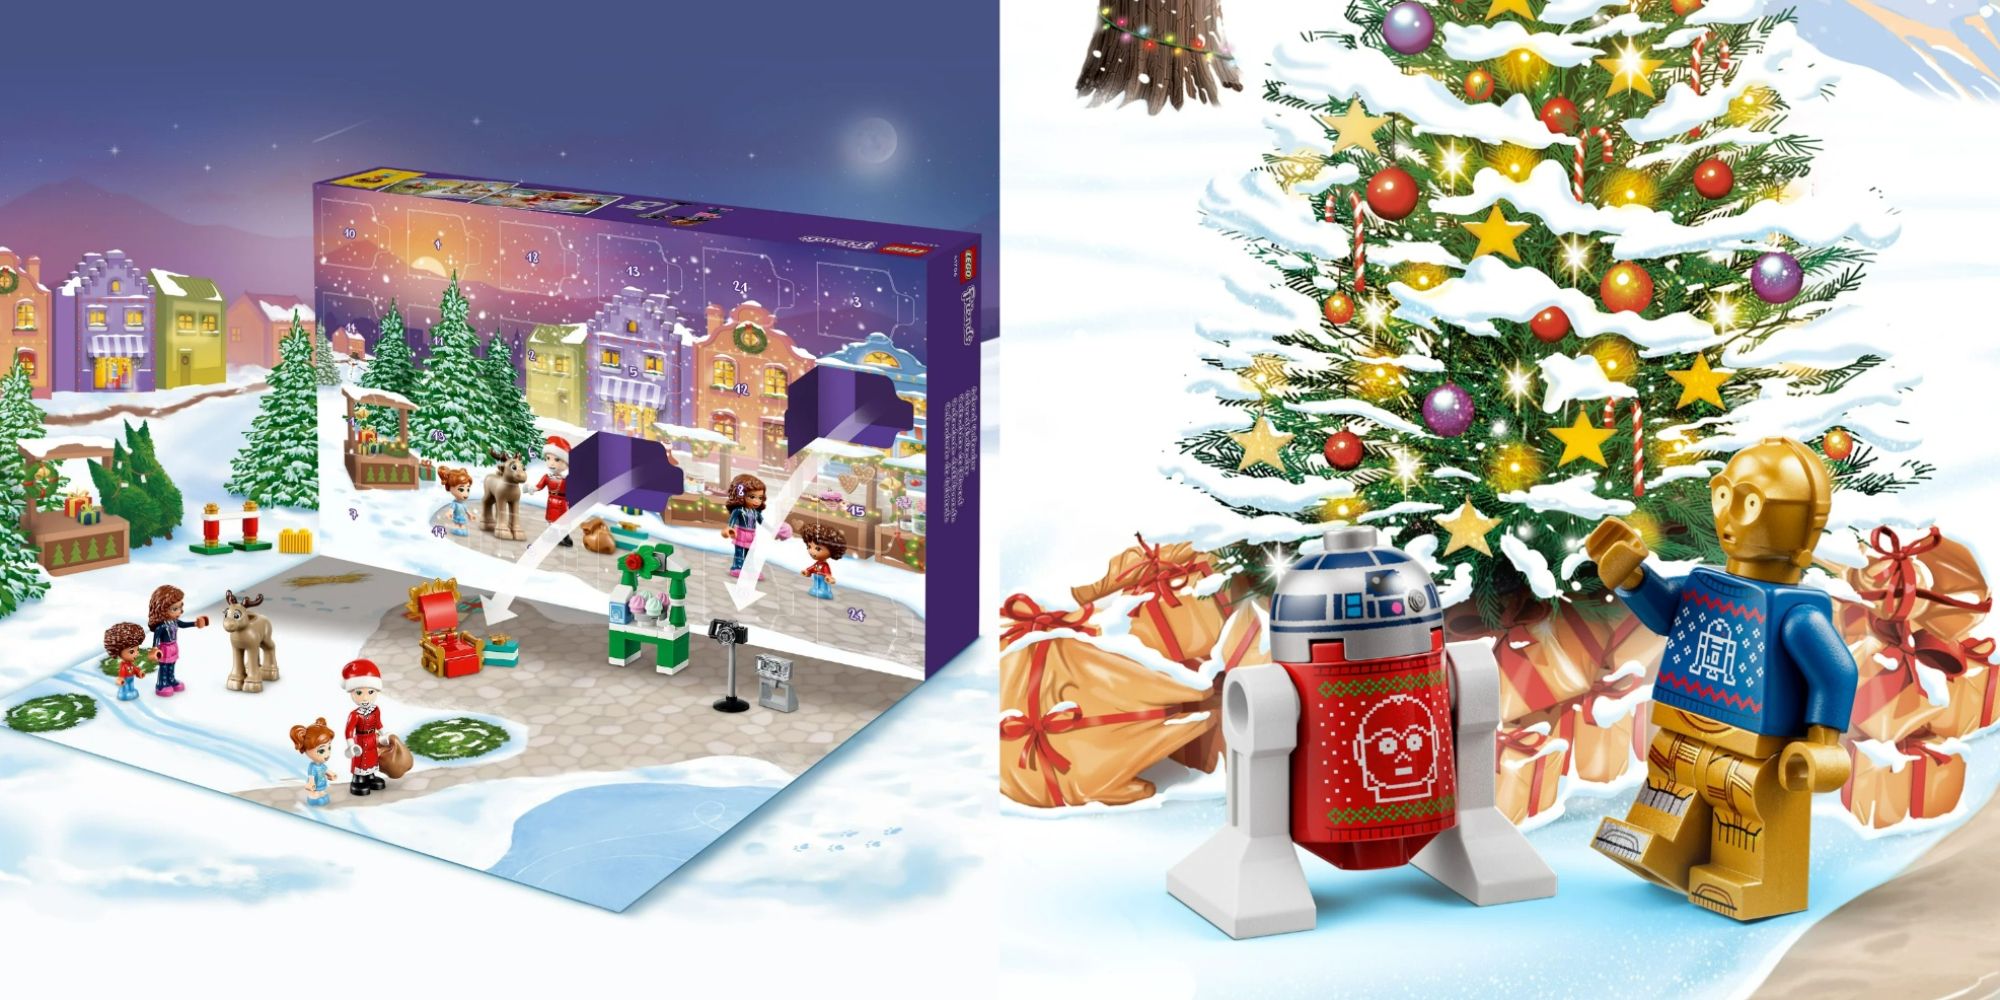 Lego Advent Calendars Featured Split Image Lego Friends Calendar And Star Wars Droids By Christmas Tree